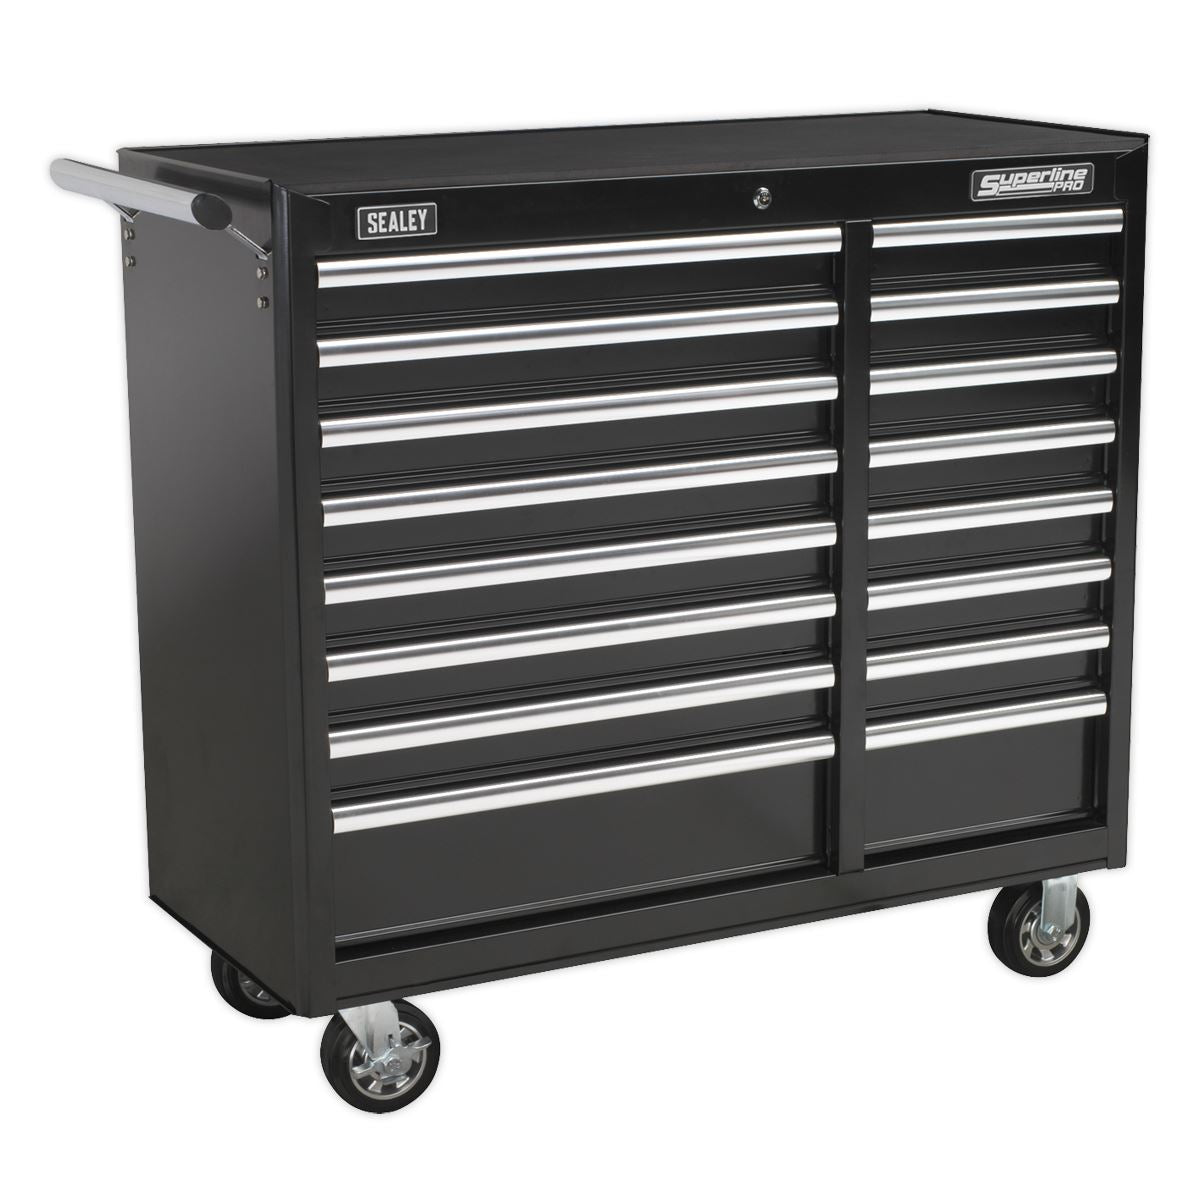 Sealey Superline Pro Rollcab 16 Drawer with Ball-Bearing Slides Heavy-Duty - Black